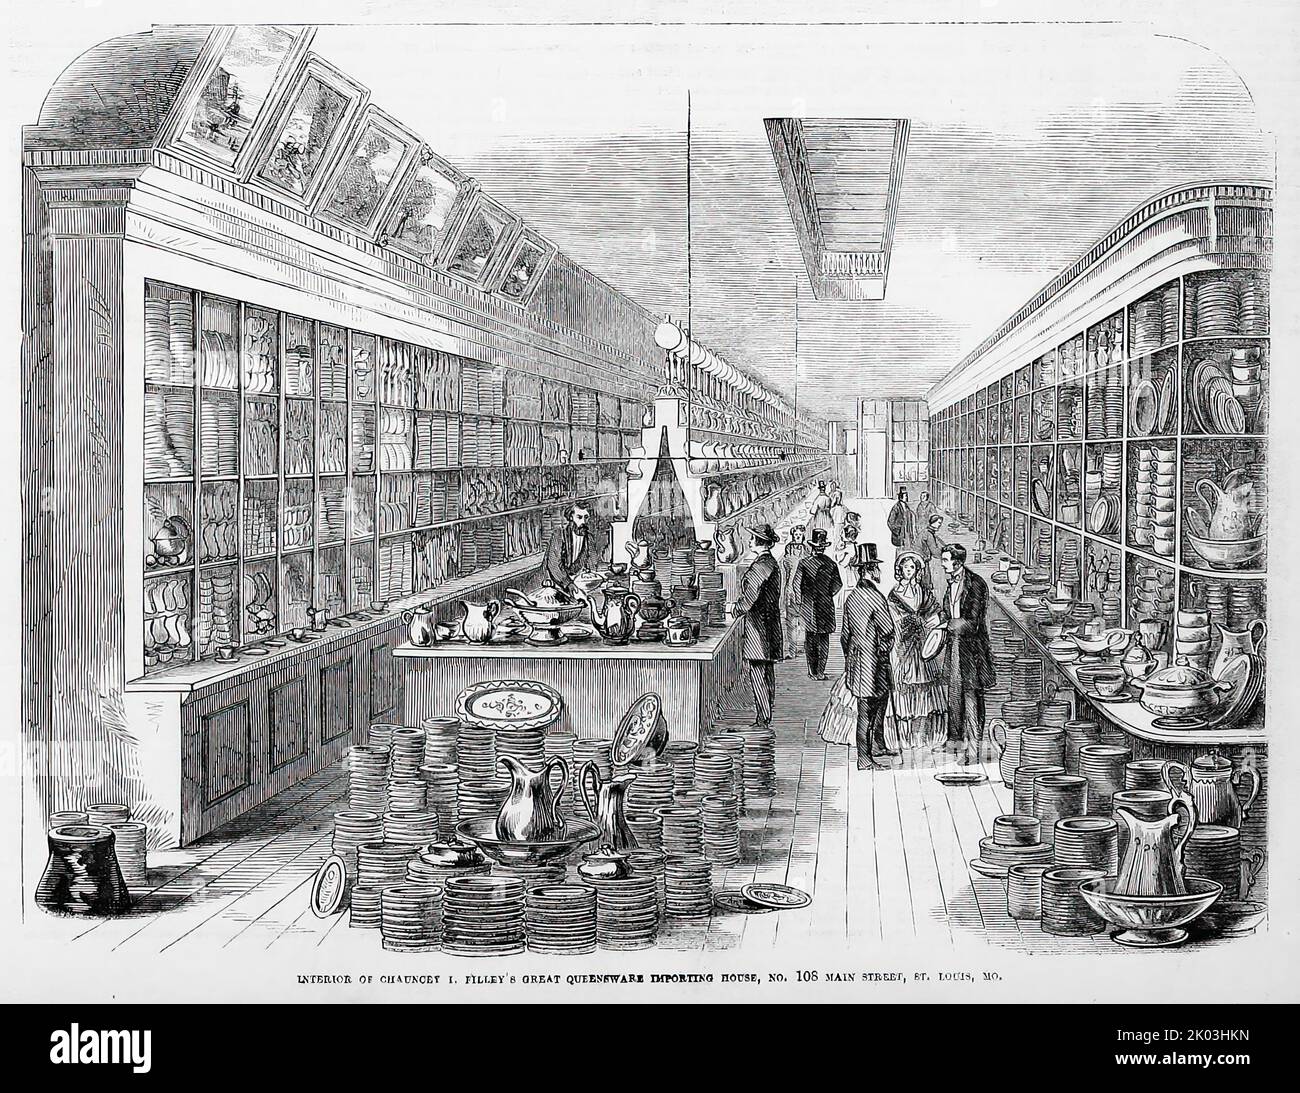 Interior of Chauncey Ives Filley's Great Queensware Importing House, No. 108 Main Street, St. Louis, Missouri (1860). 19th century illustration from Frank Leslie's Illustrated Newspaper Stock Photo